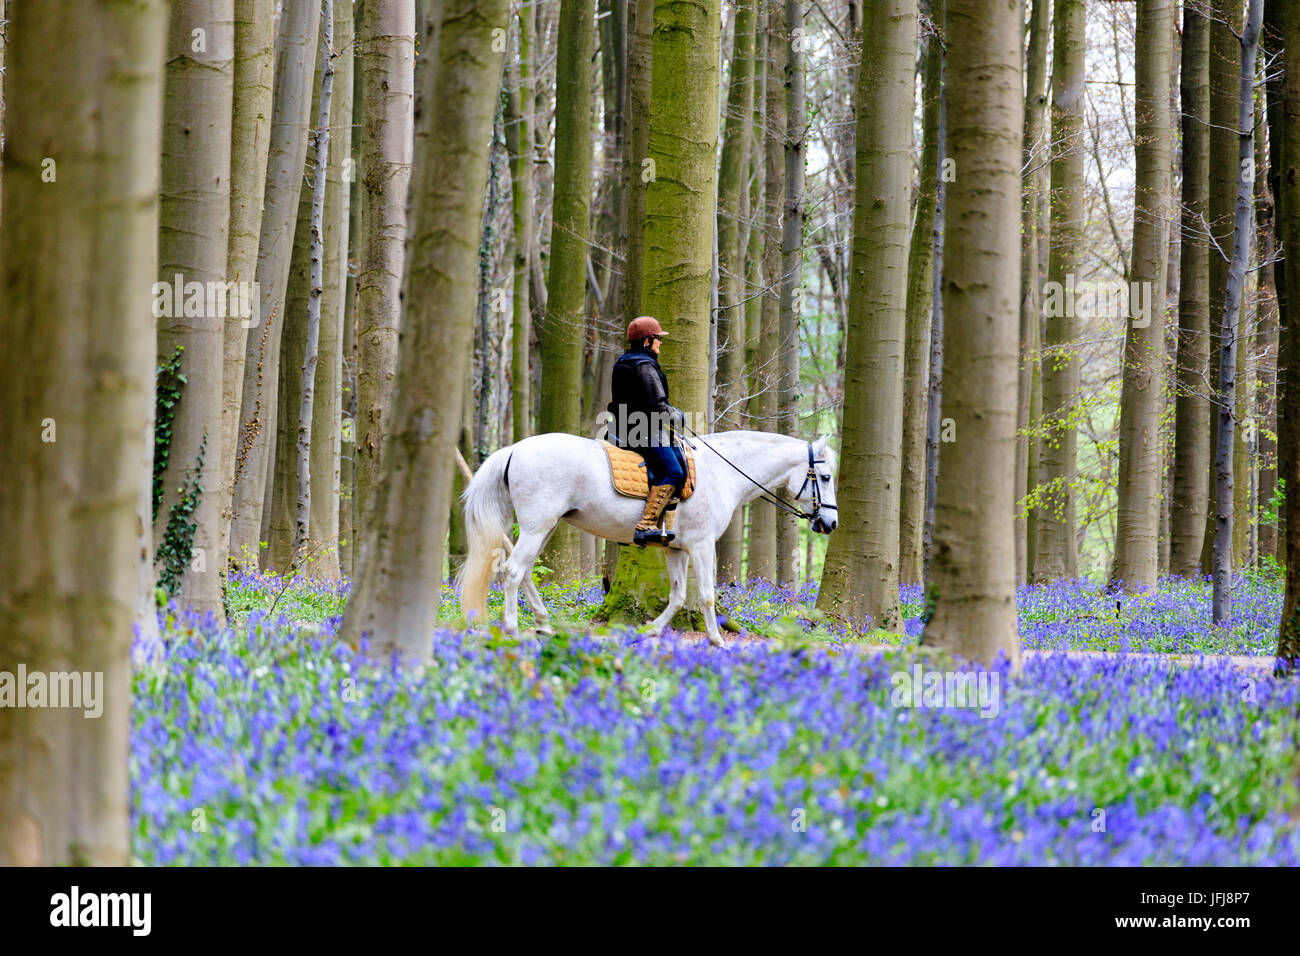 Horse riding between trunks of the Sequoia trees and purple bluebells in bloom in the Hallerbos forest Halle Belgium Europe Stock Photo